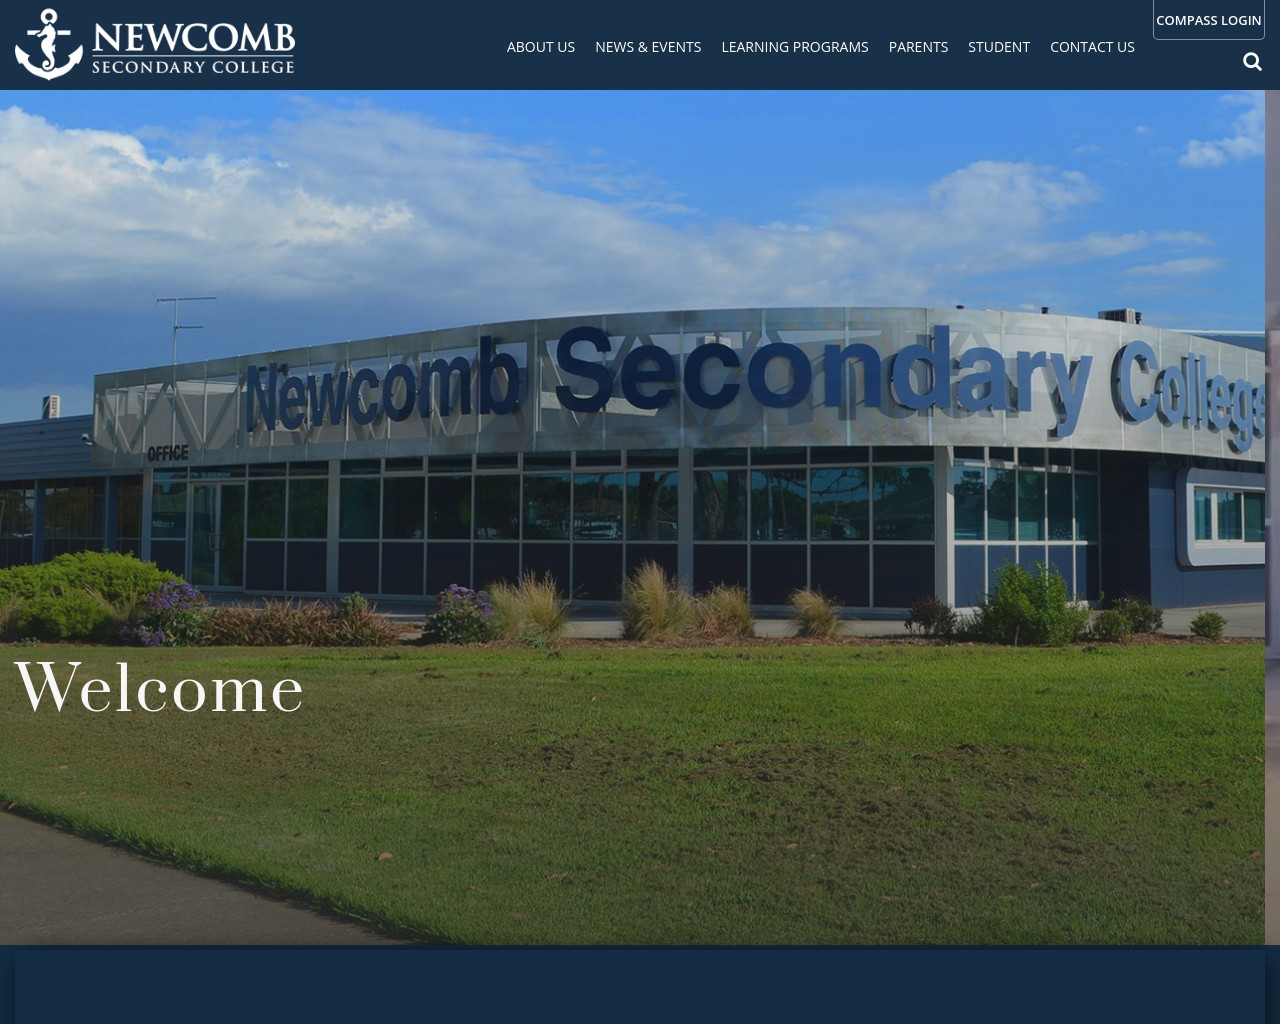 Newcomb Secondary College